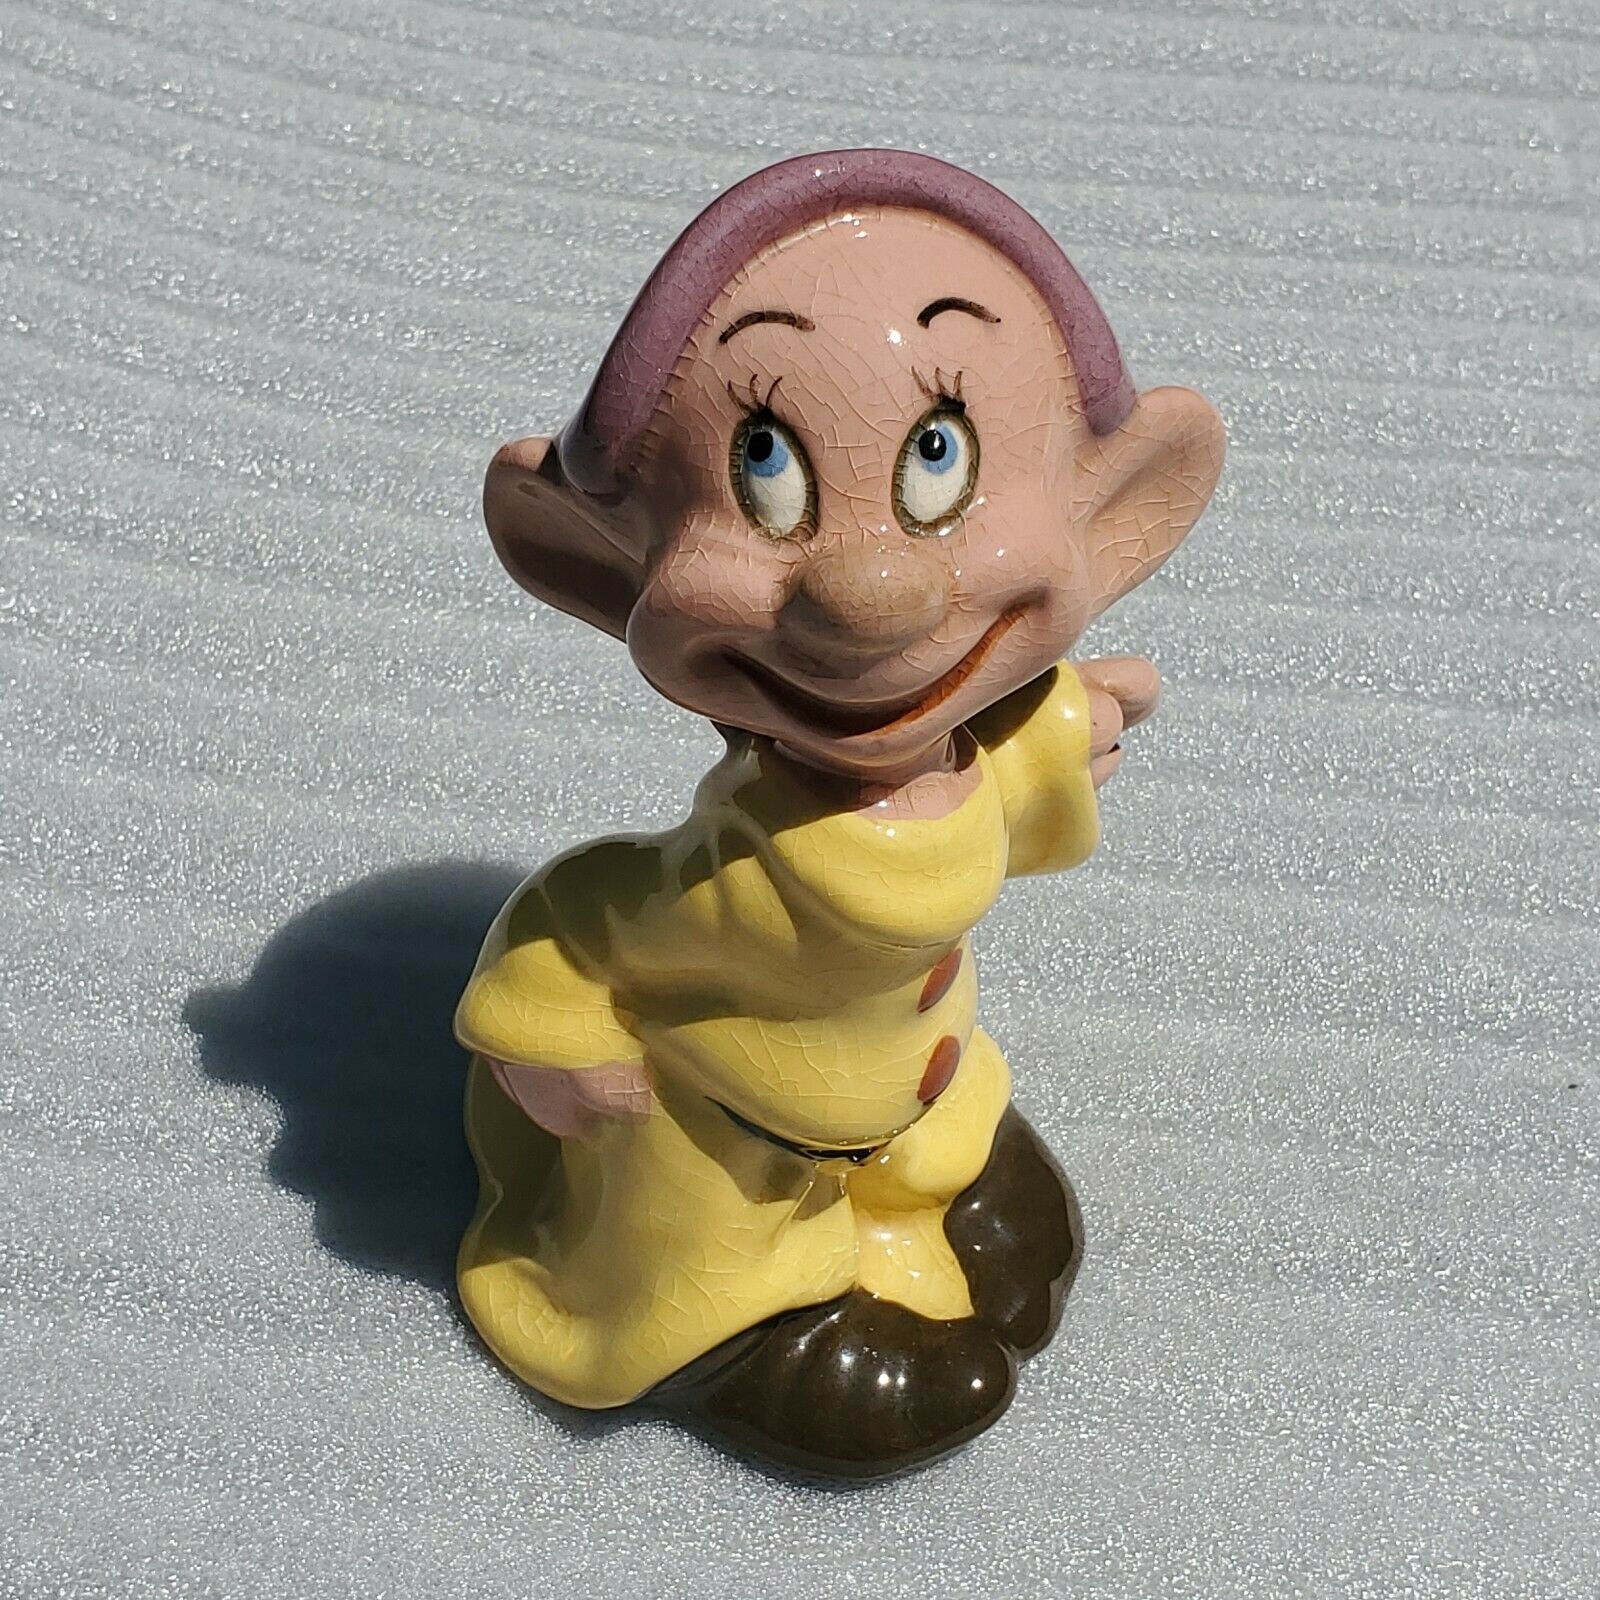 Snow Whites "dopey"  By American Pottery Co. Walt Disney Figurine 5 3/4". Clean